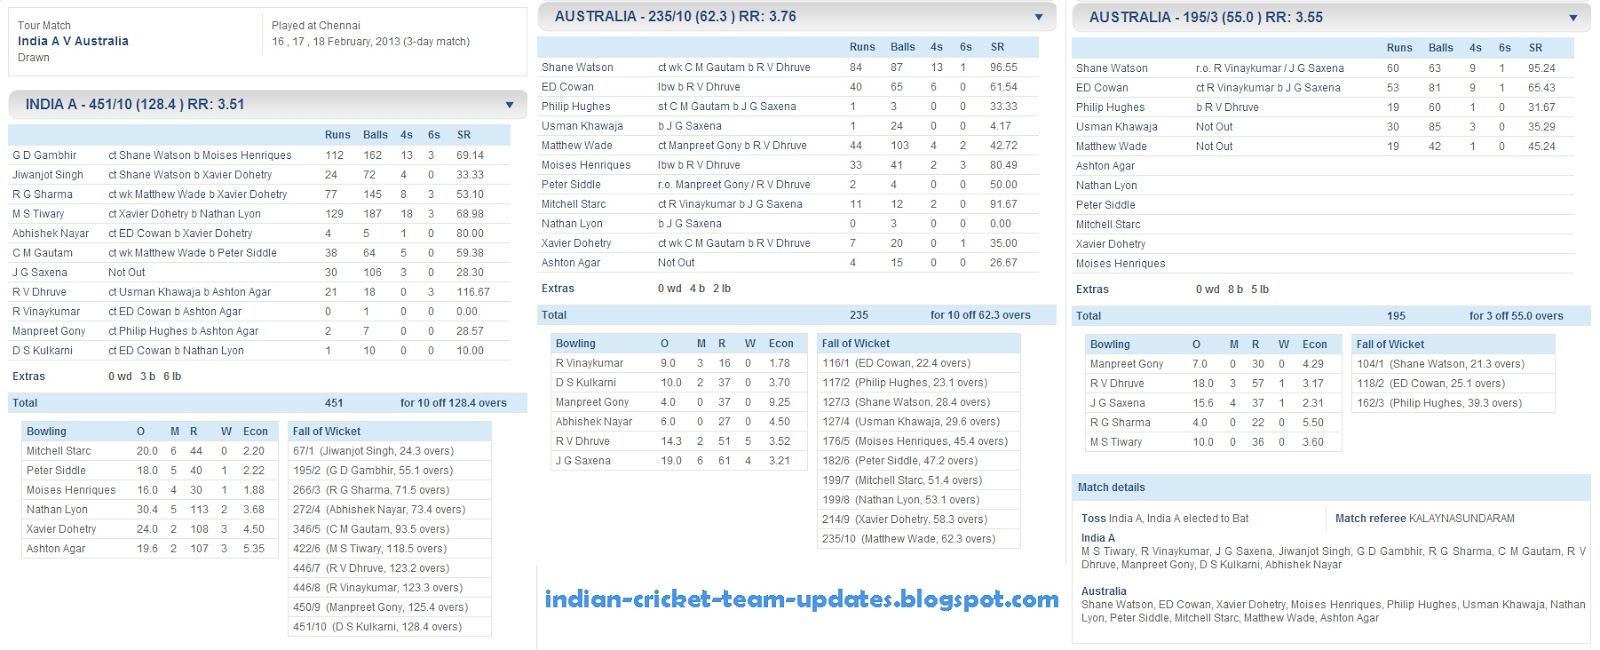 Tour Match India A vs Australia ends in draw ~ Indian Cricket Team Updates